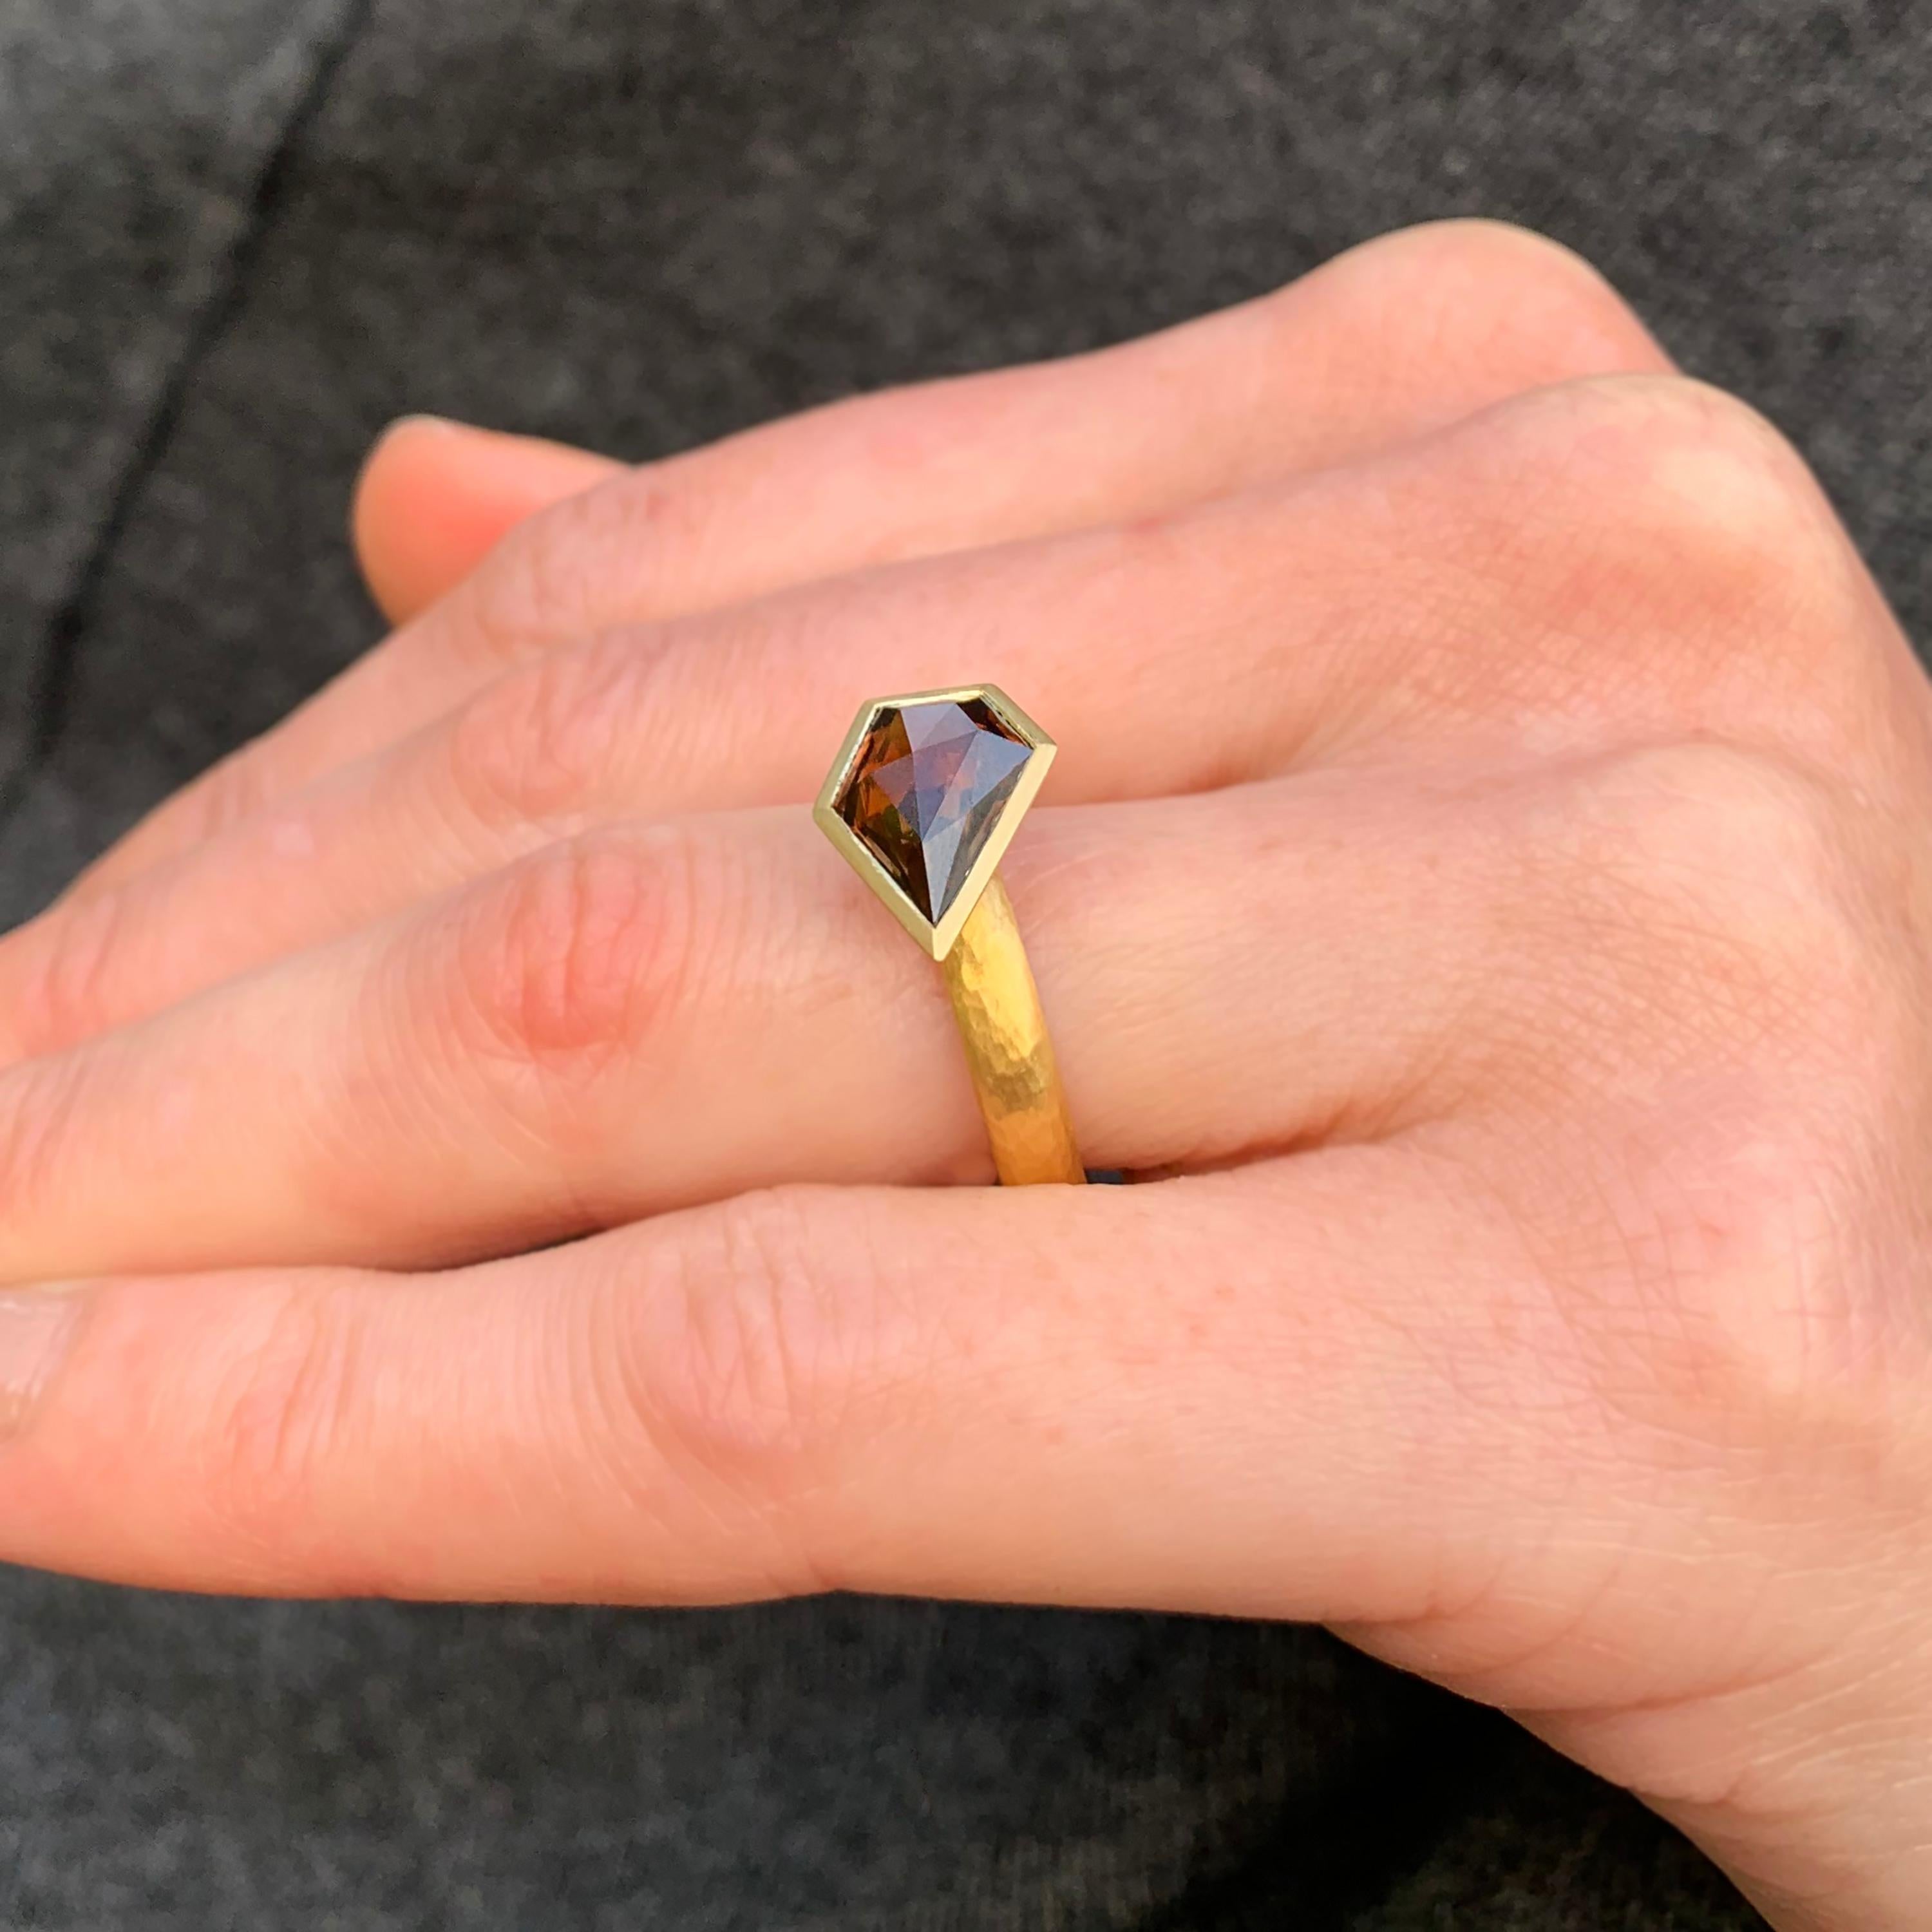 Captivating brown zircon free-form cut by the designer and bezel-set on a substantial gold shank. A beautiful freeform cut Australian zircon (3.75ct) is neatly set in to 18k yellow gold. The contrast of scintillation from the stone and the soft